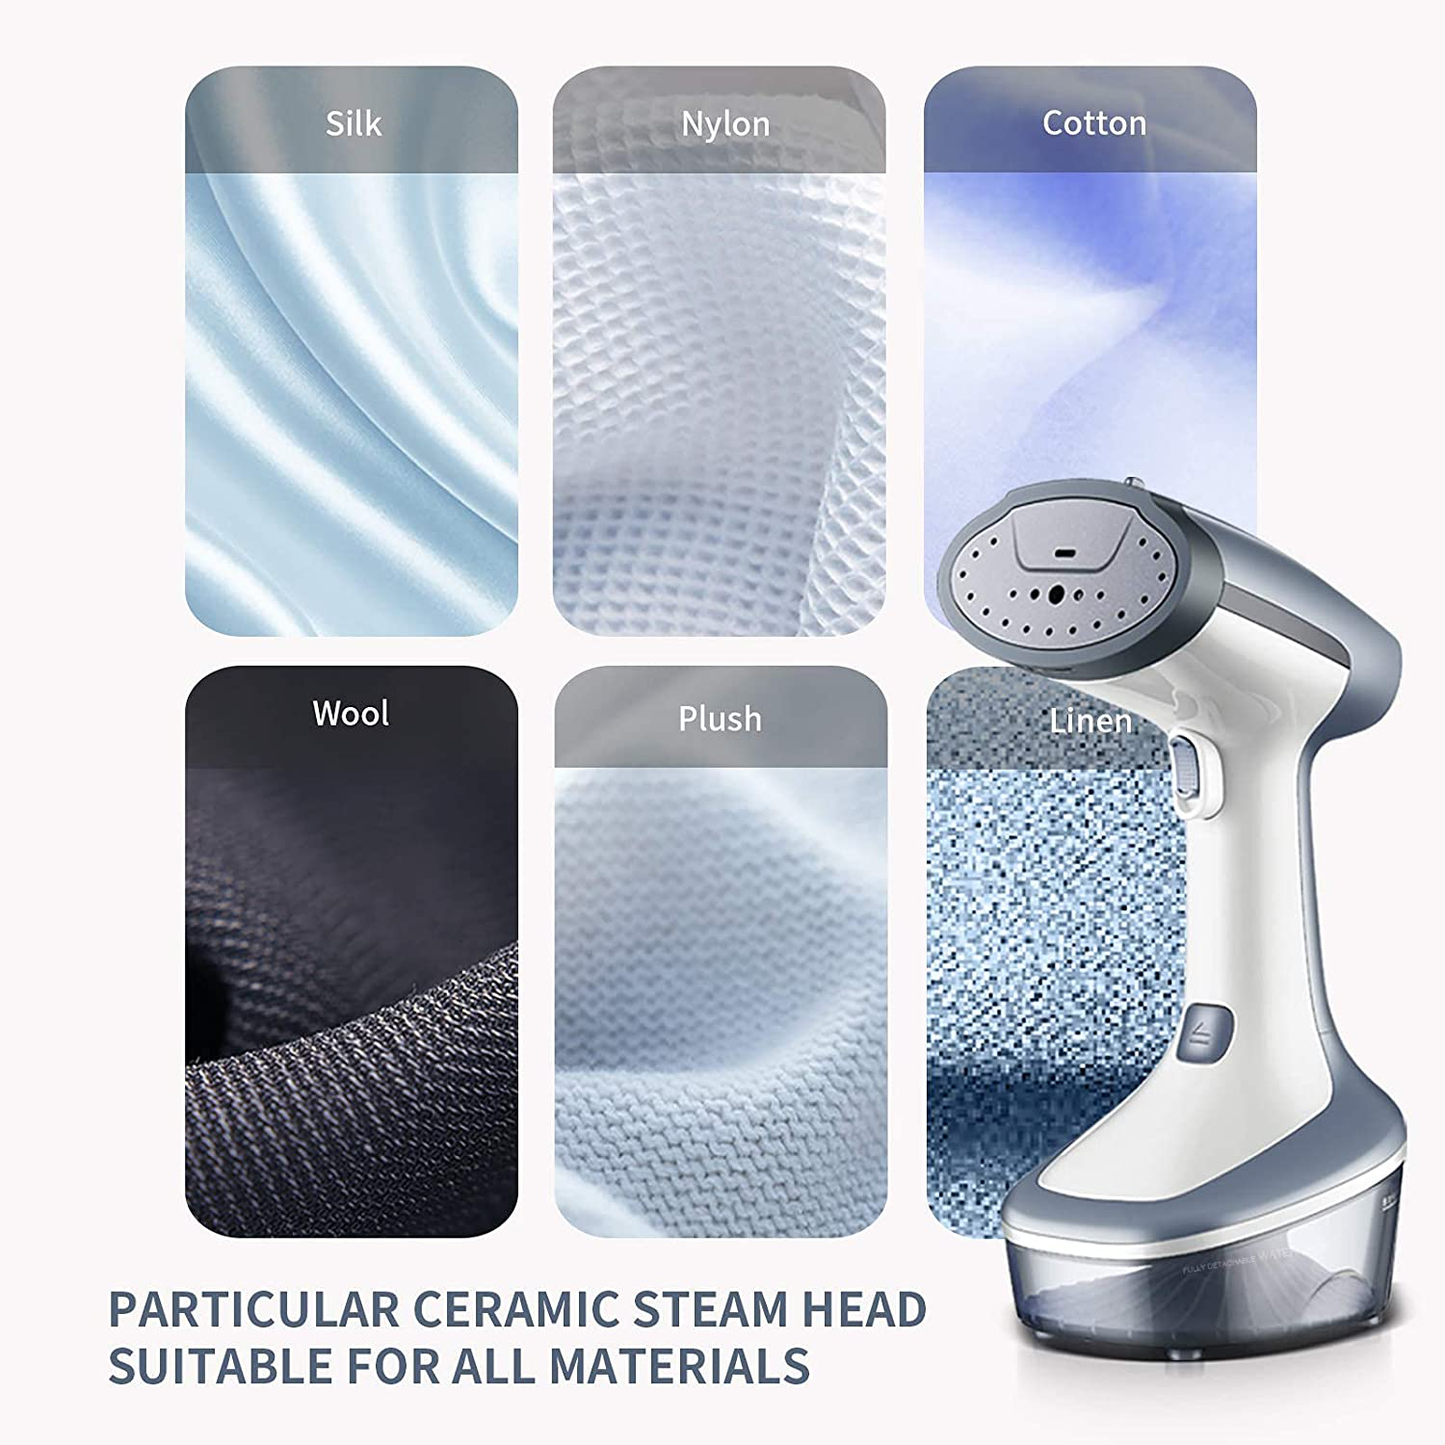 YIKA Steamer for Clothes, 300ml Hand-Held Clothes Steamer with Ceramic Iron Panel, 1200W Garment & Fabric Wrinkle Remover, 25 mins Continuous Steam, 30s Heat Up Portable Travel Clothing Steamer